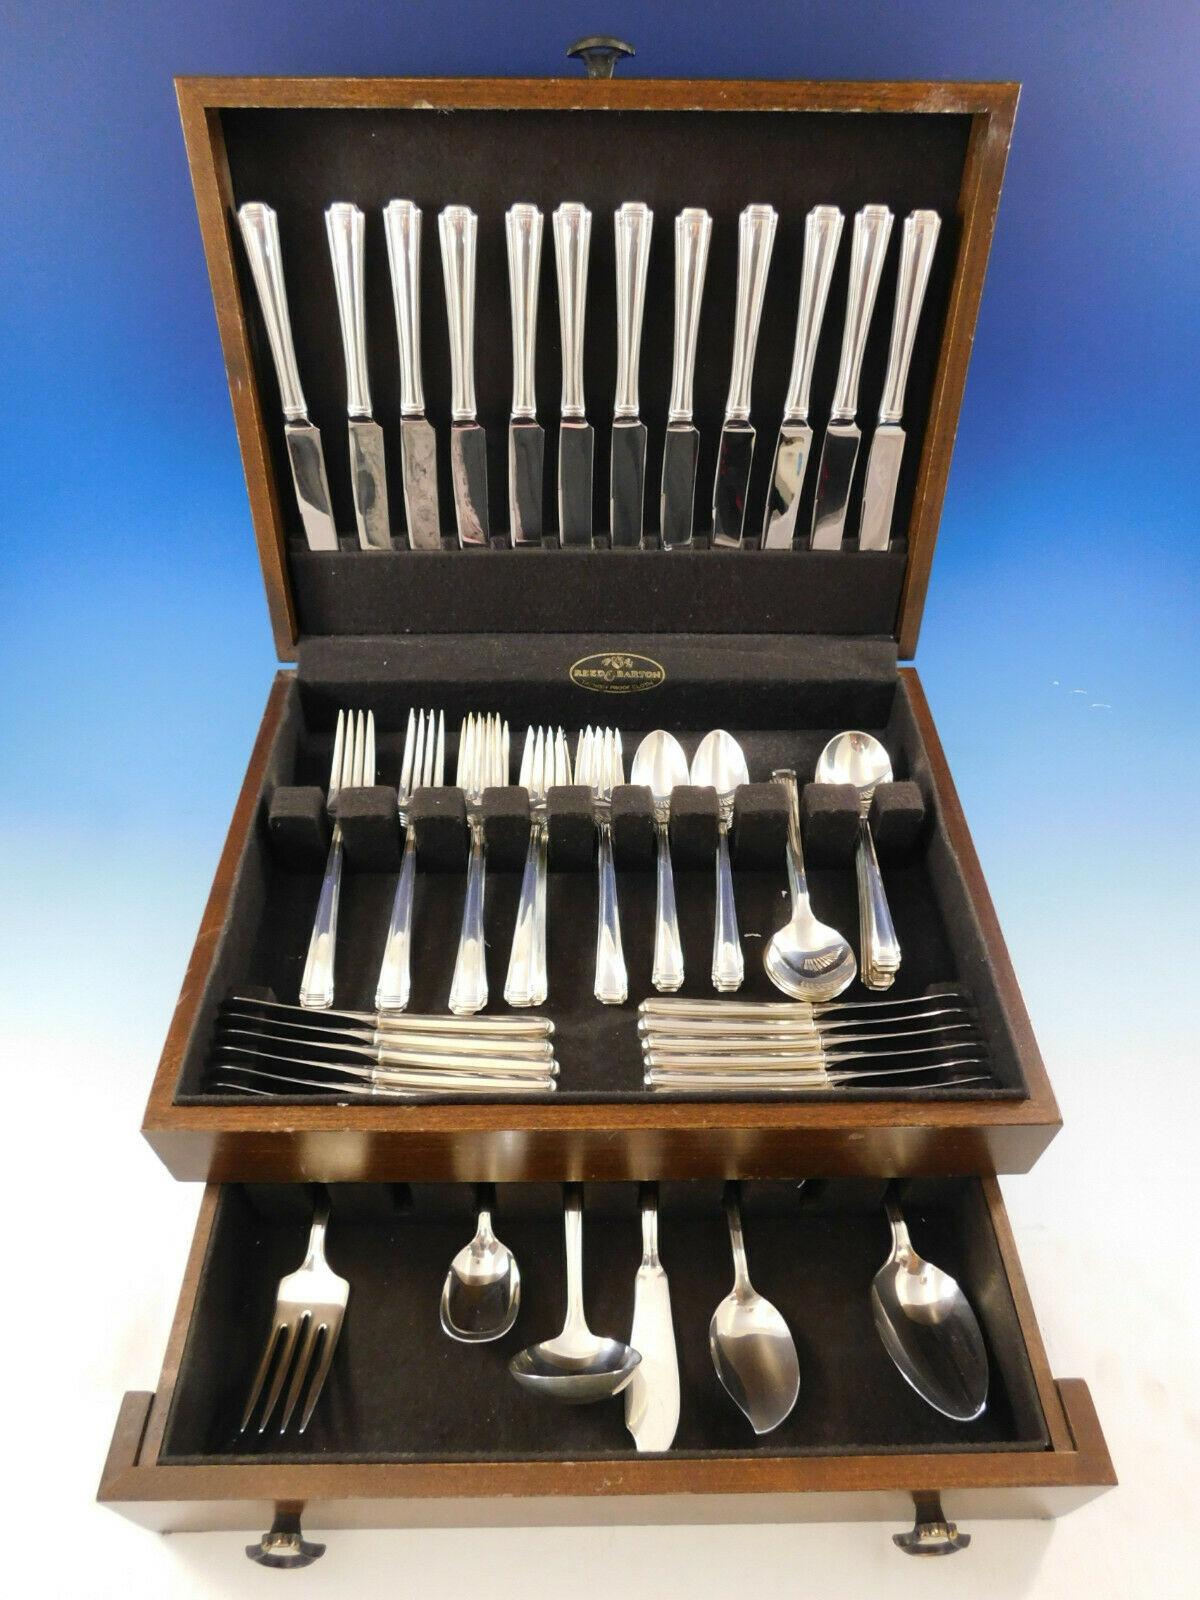 John and Priscilla by Westmorland circa 1940 sterling silver flatware set of 78 pieces. This set includes:

12 knives, 9